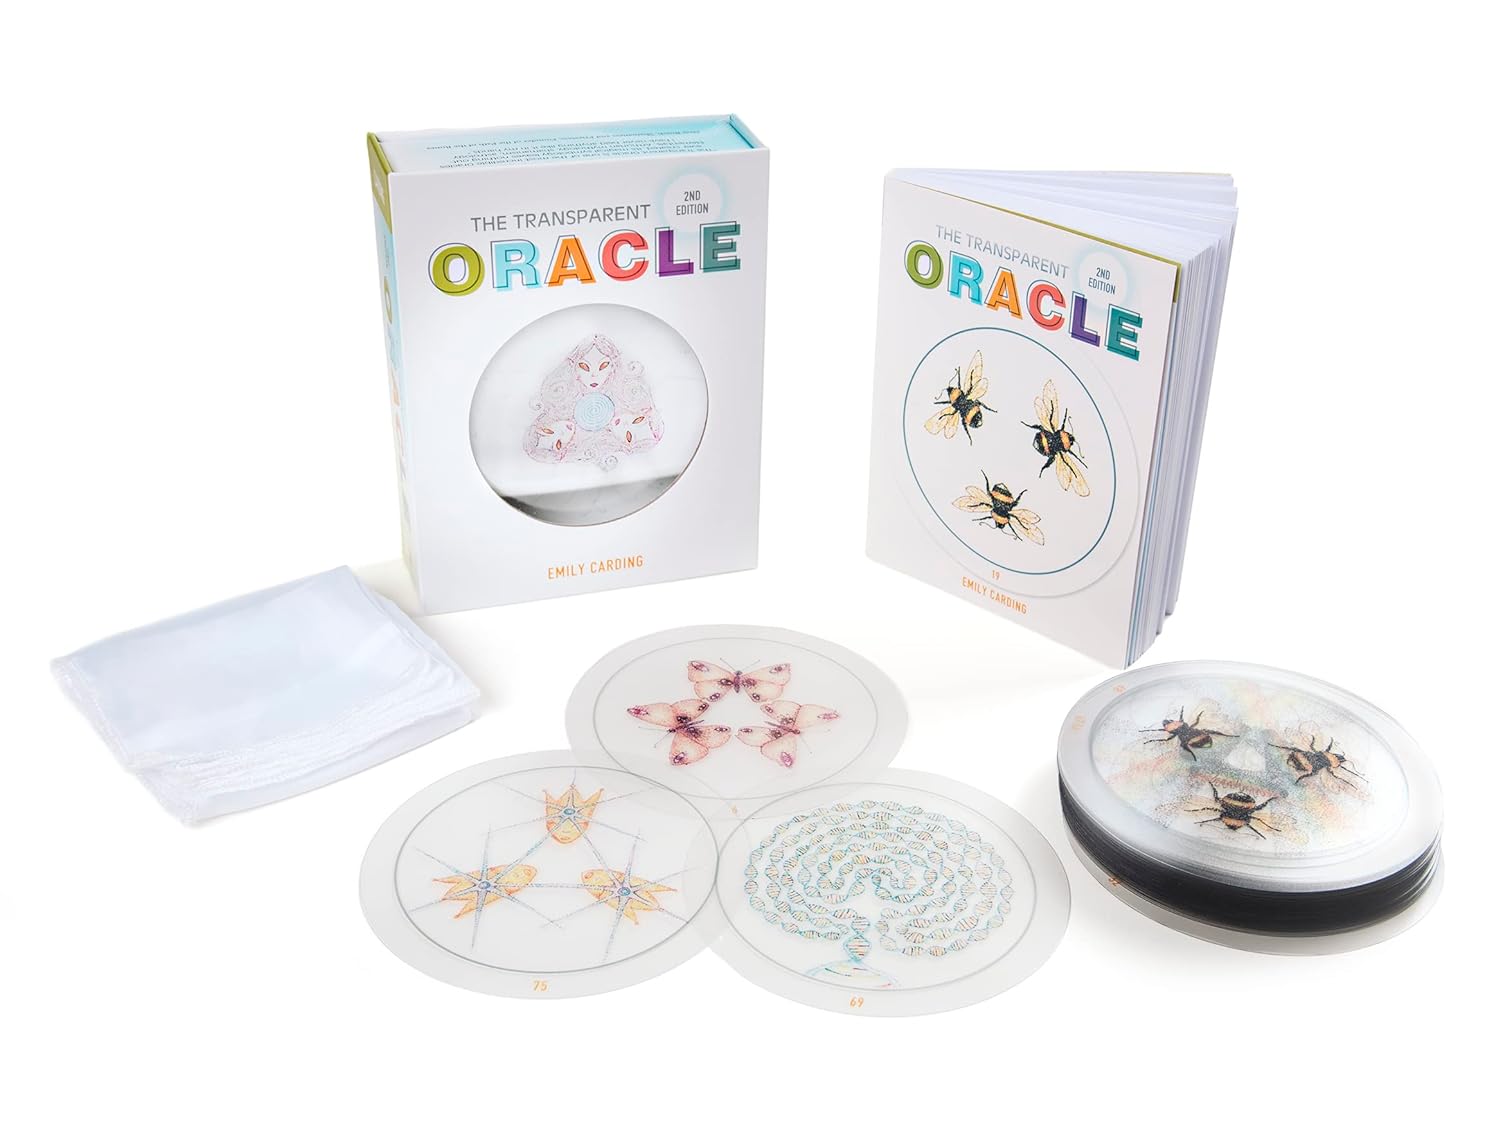 Transparent Oracle 2nd Edition